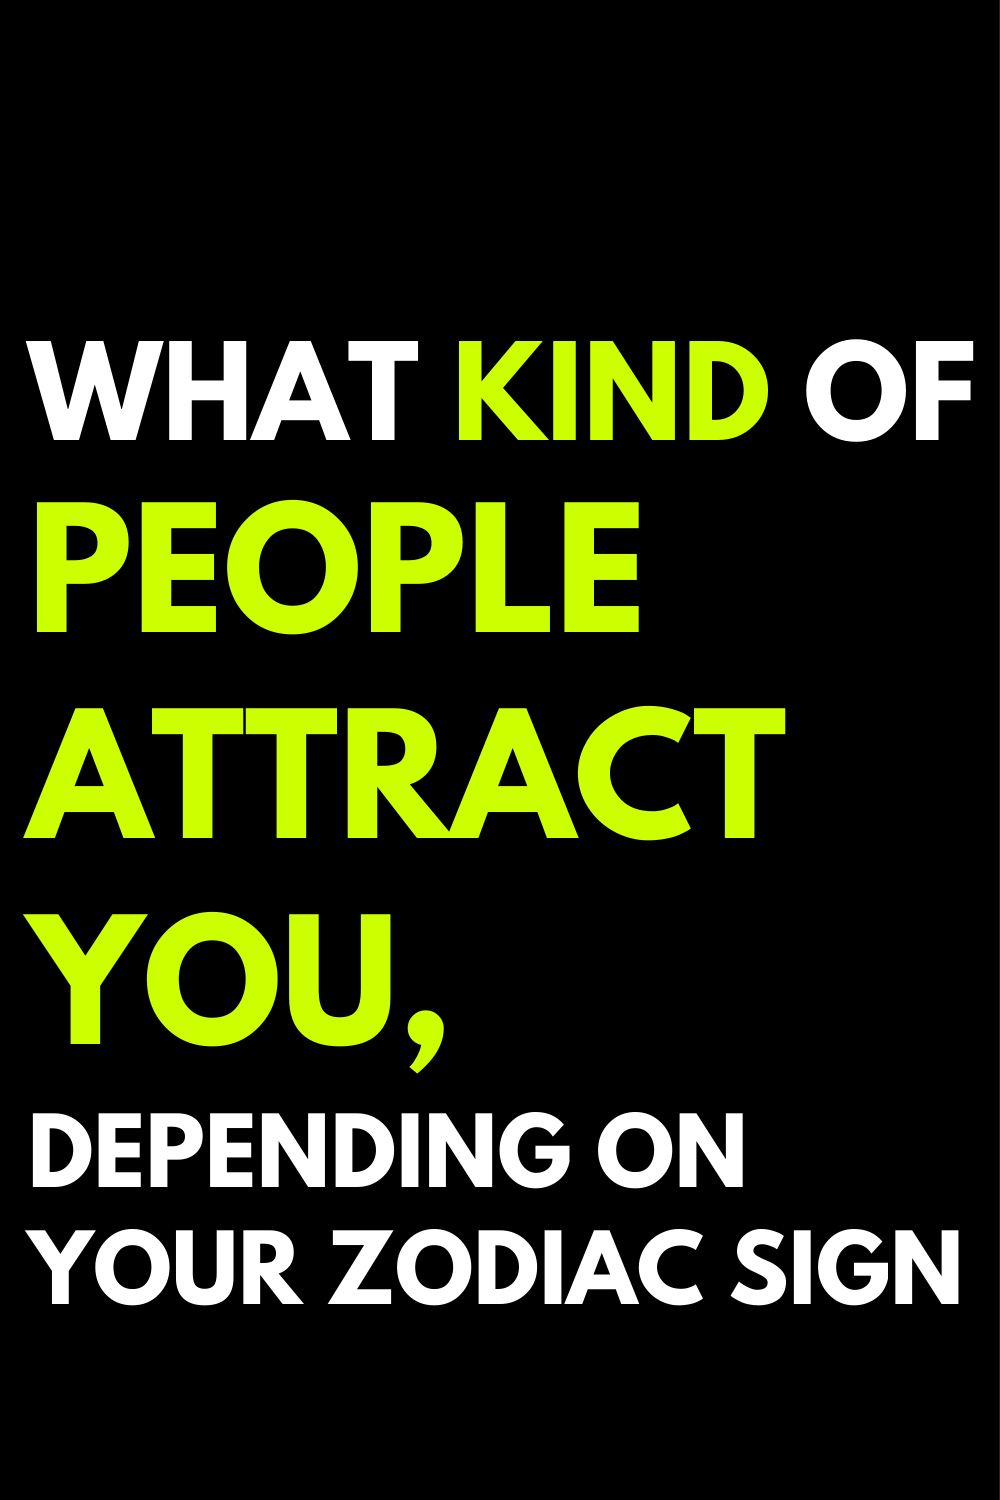 What kind of people attract you, depending on your zodiac sign